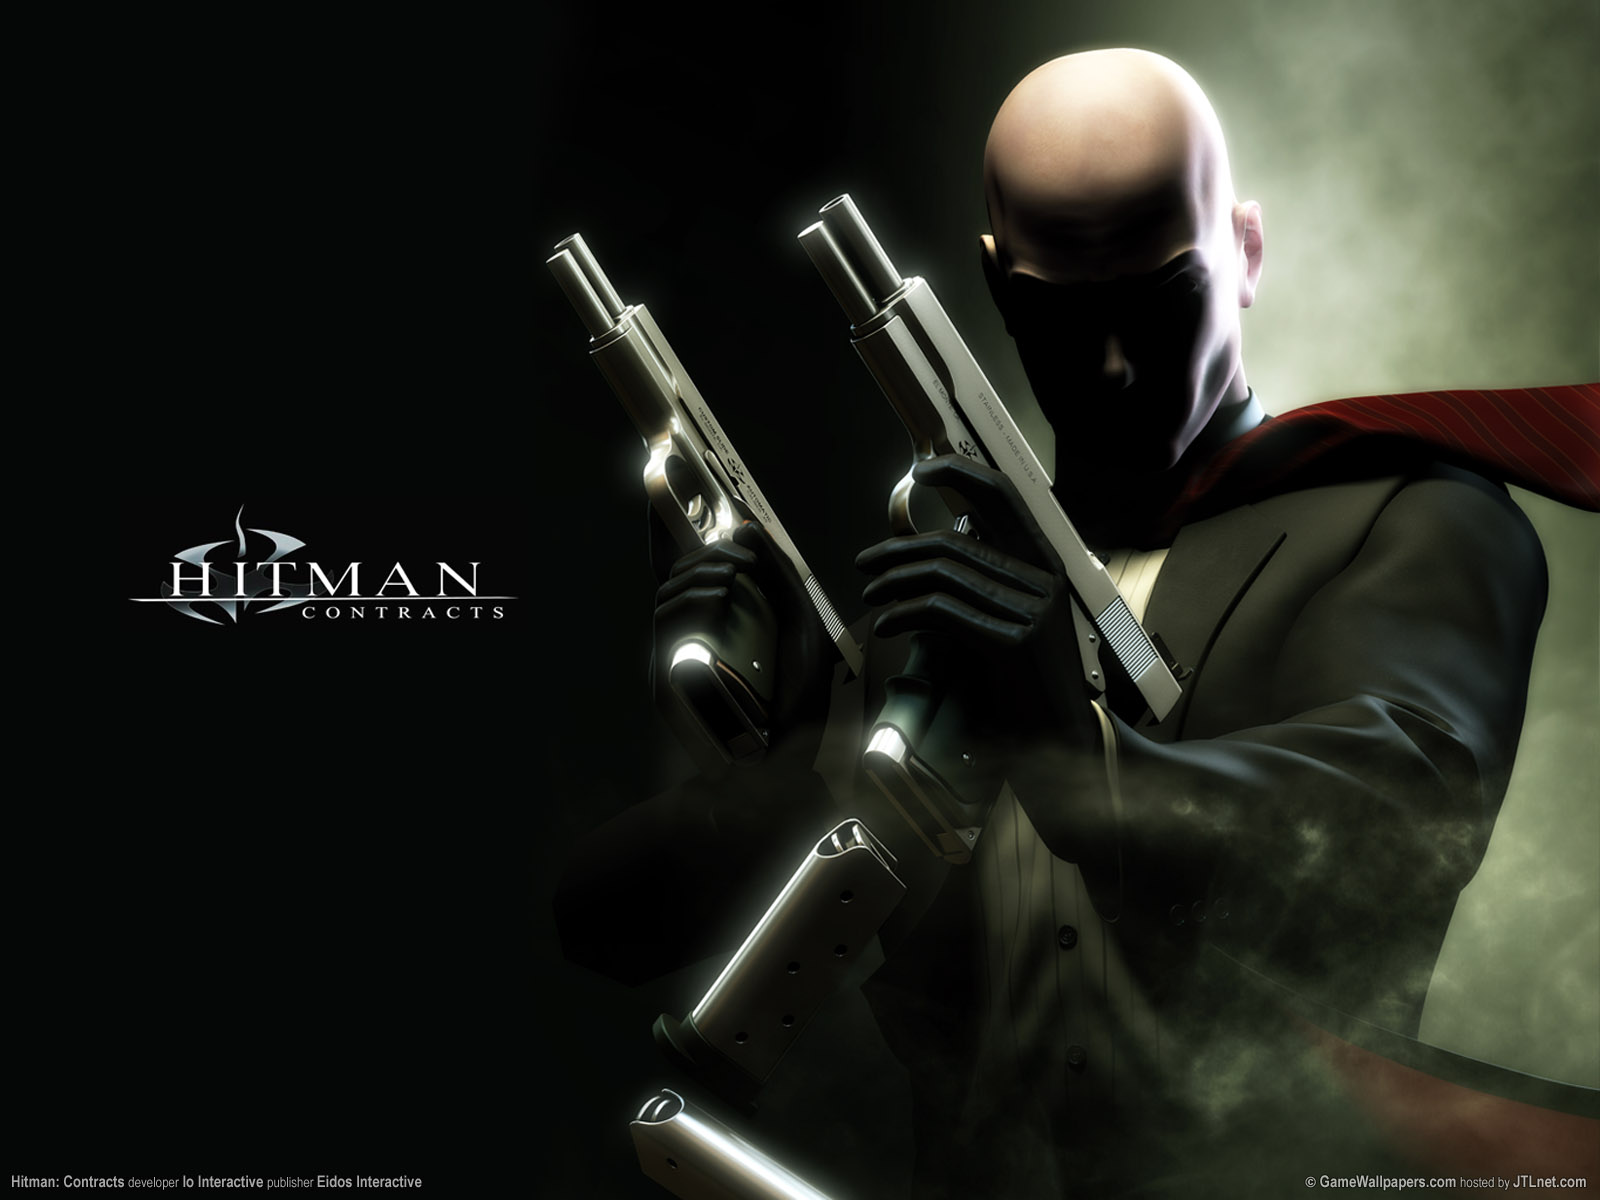 Contracts Wallpapers And Stock Photos - Hitman Contracts , HD Wallpaper & Backgrounds